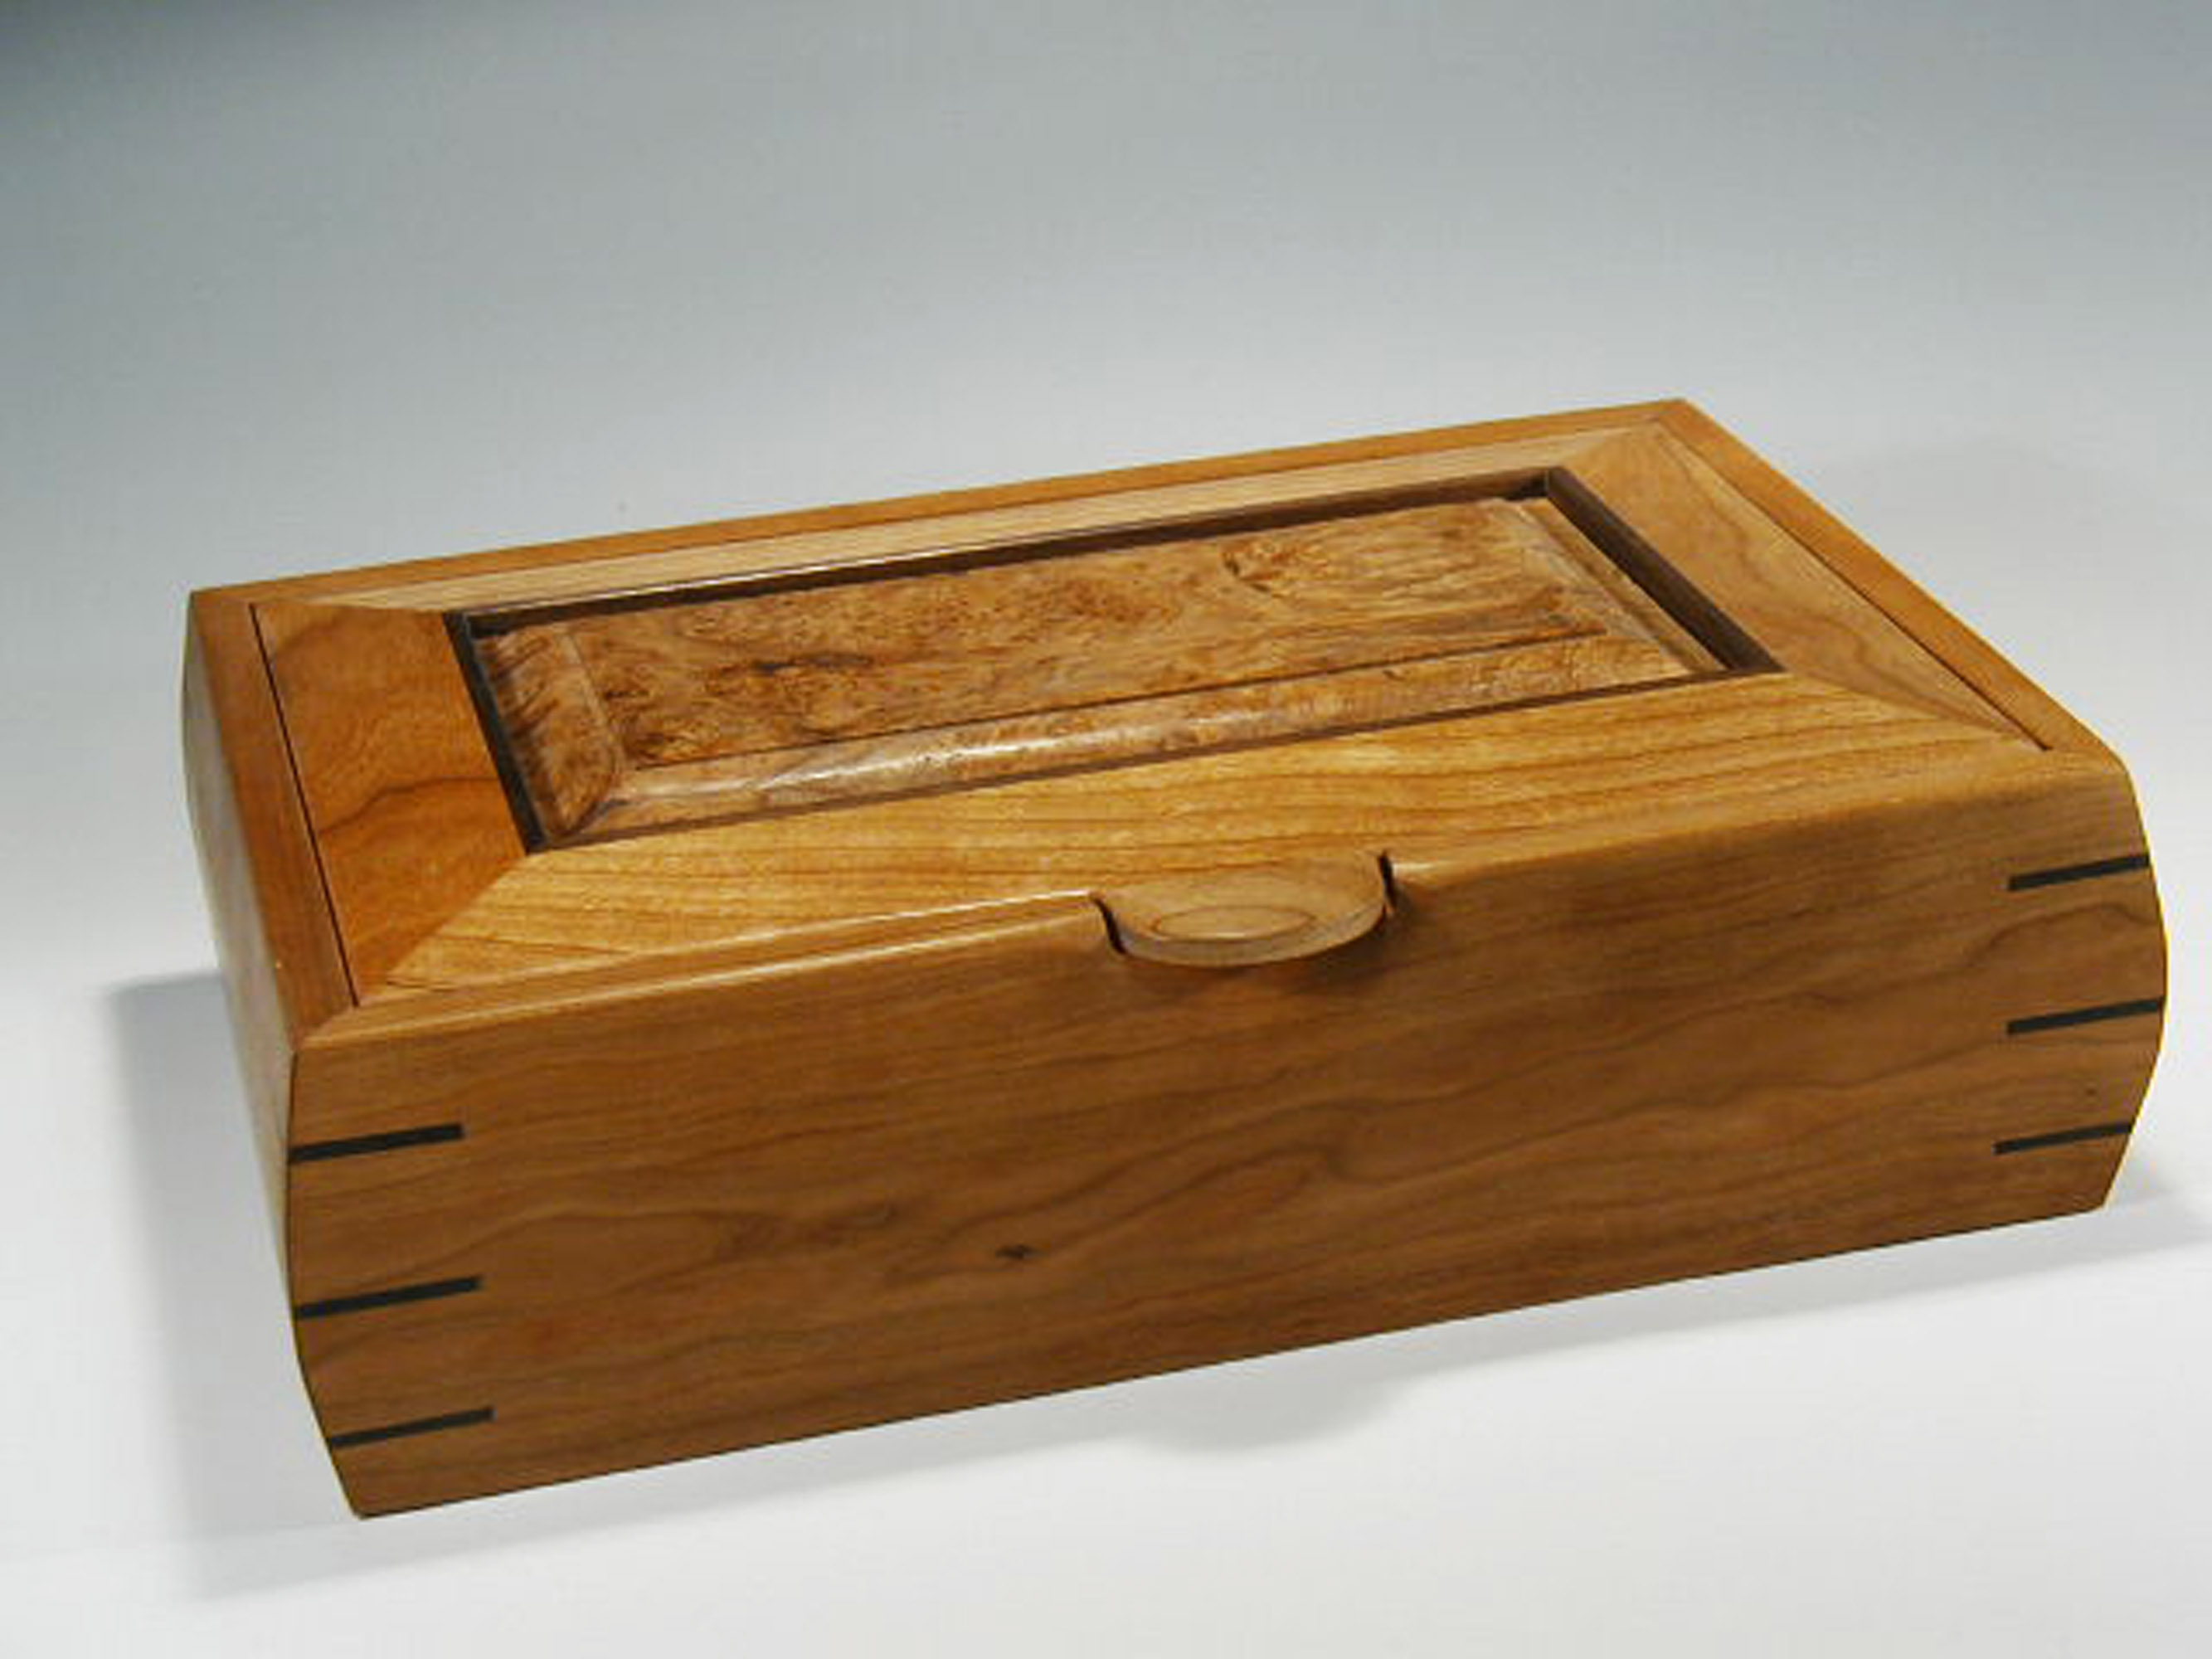 Handmade Wooden Boxes Make Truly Unique Gifts for Women or Men